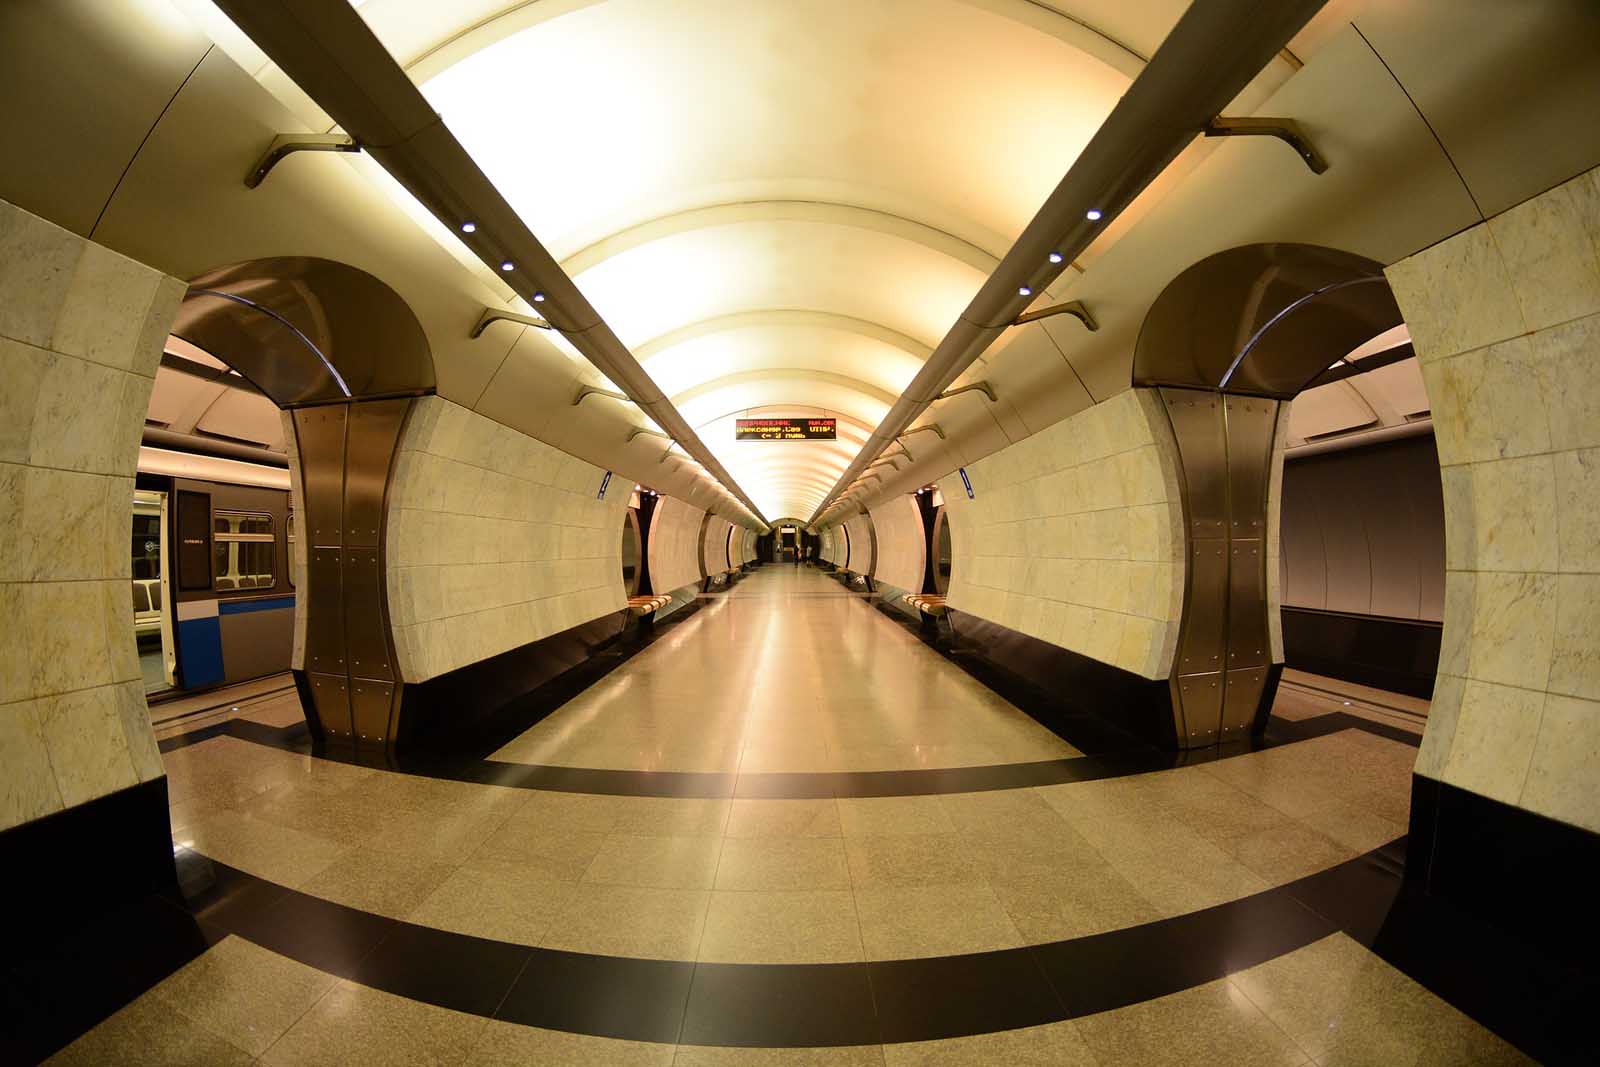 Moscow Metro in Russia